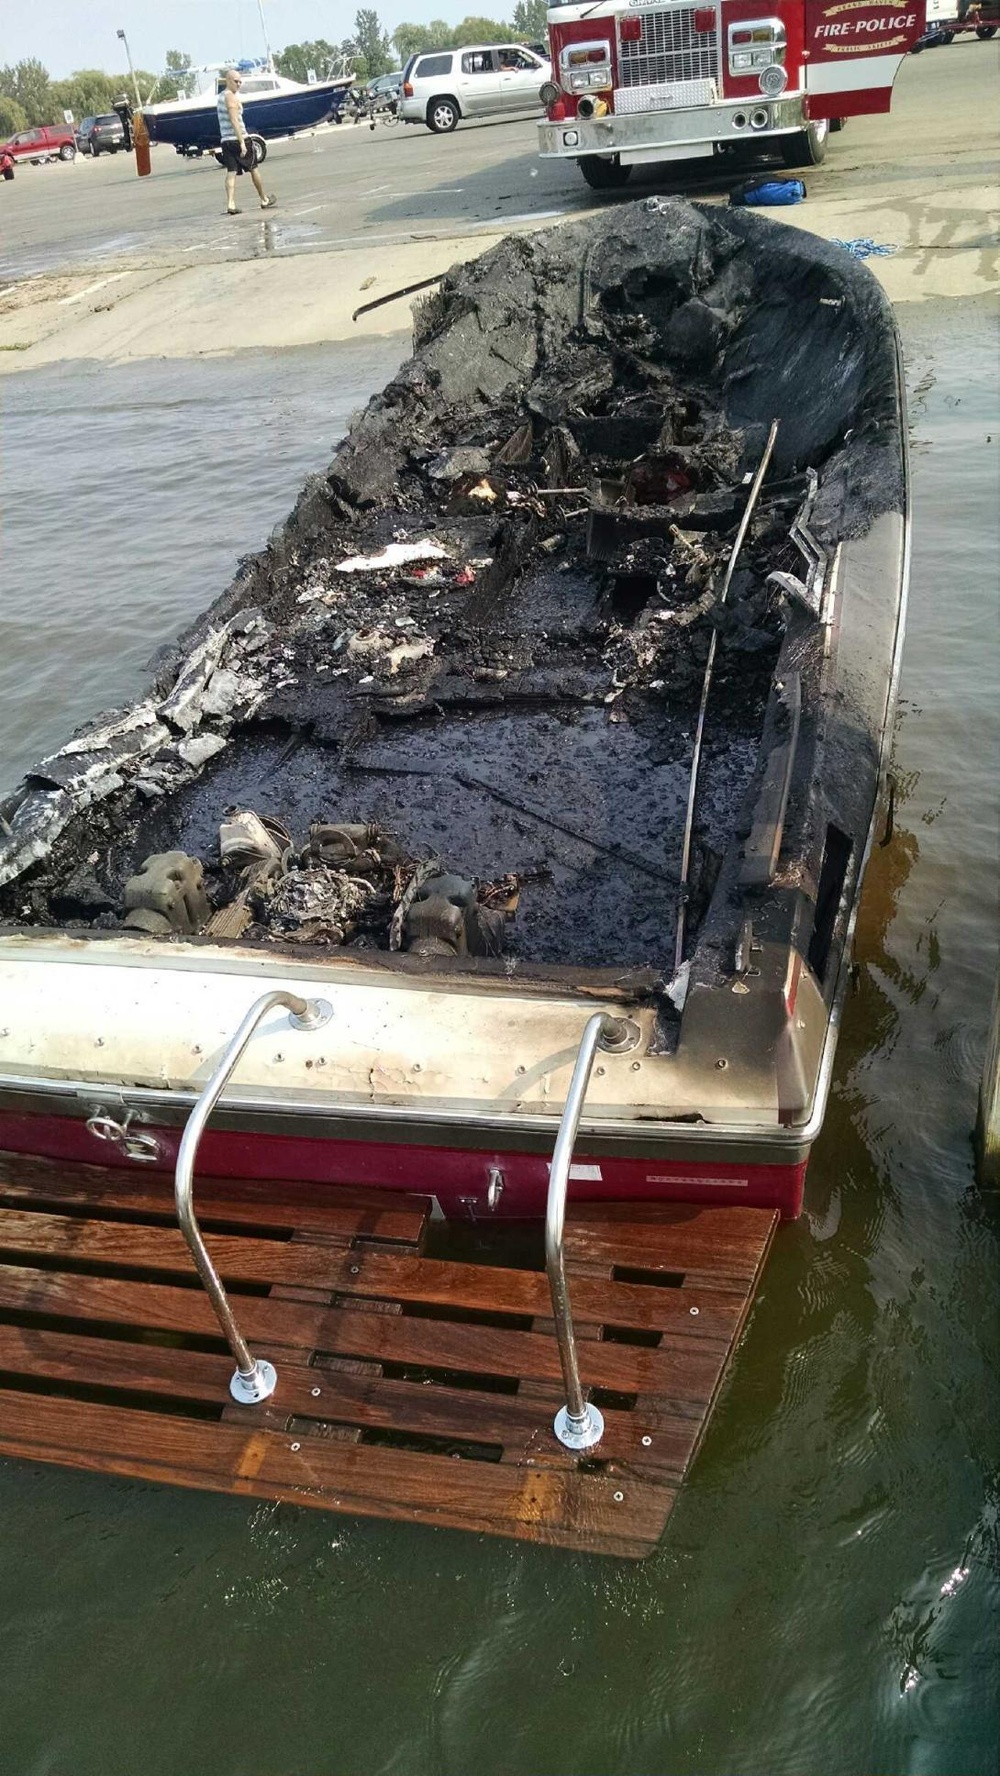 Coast Guard, good Samaritan rescue 4 people from burning boat on Grand River off Grand Haven